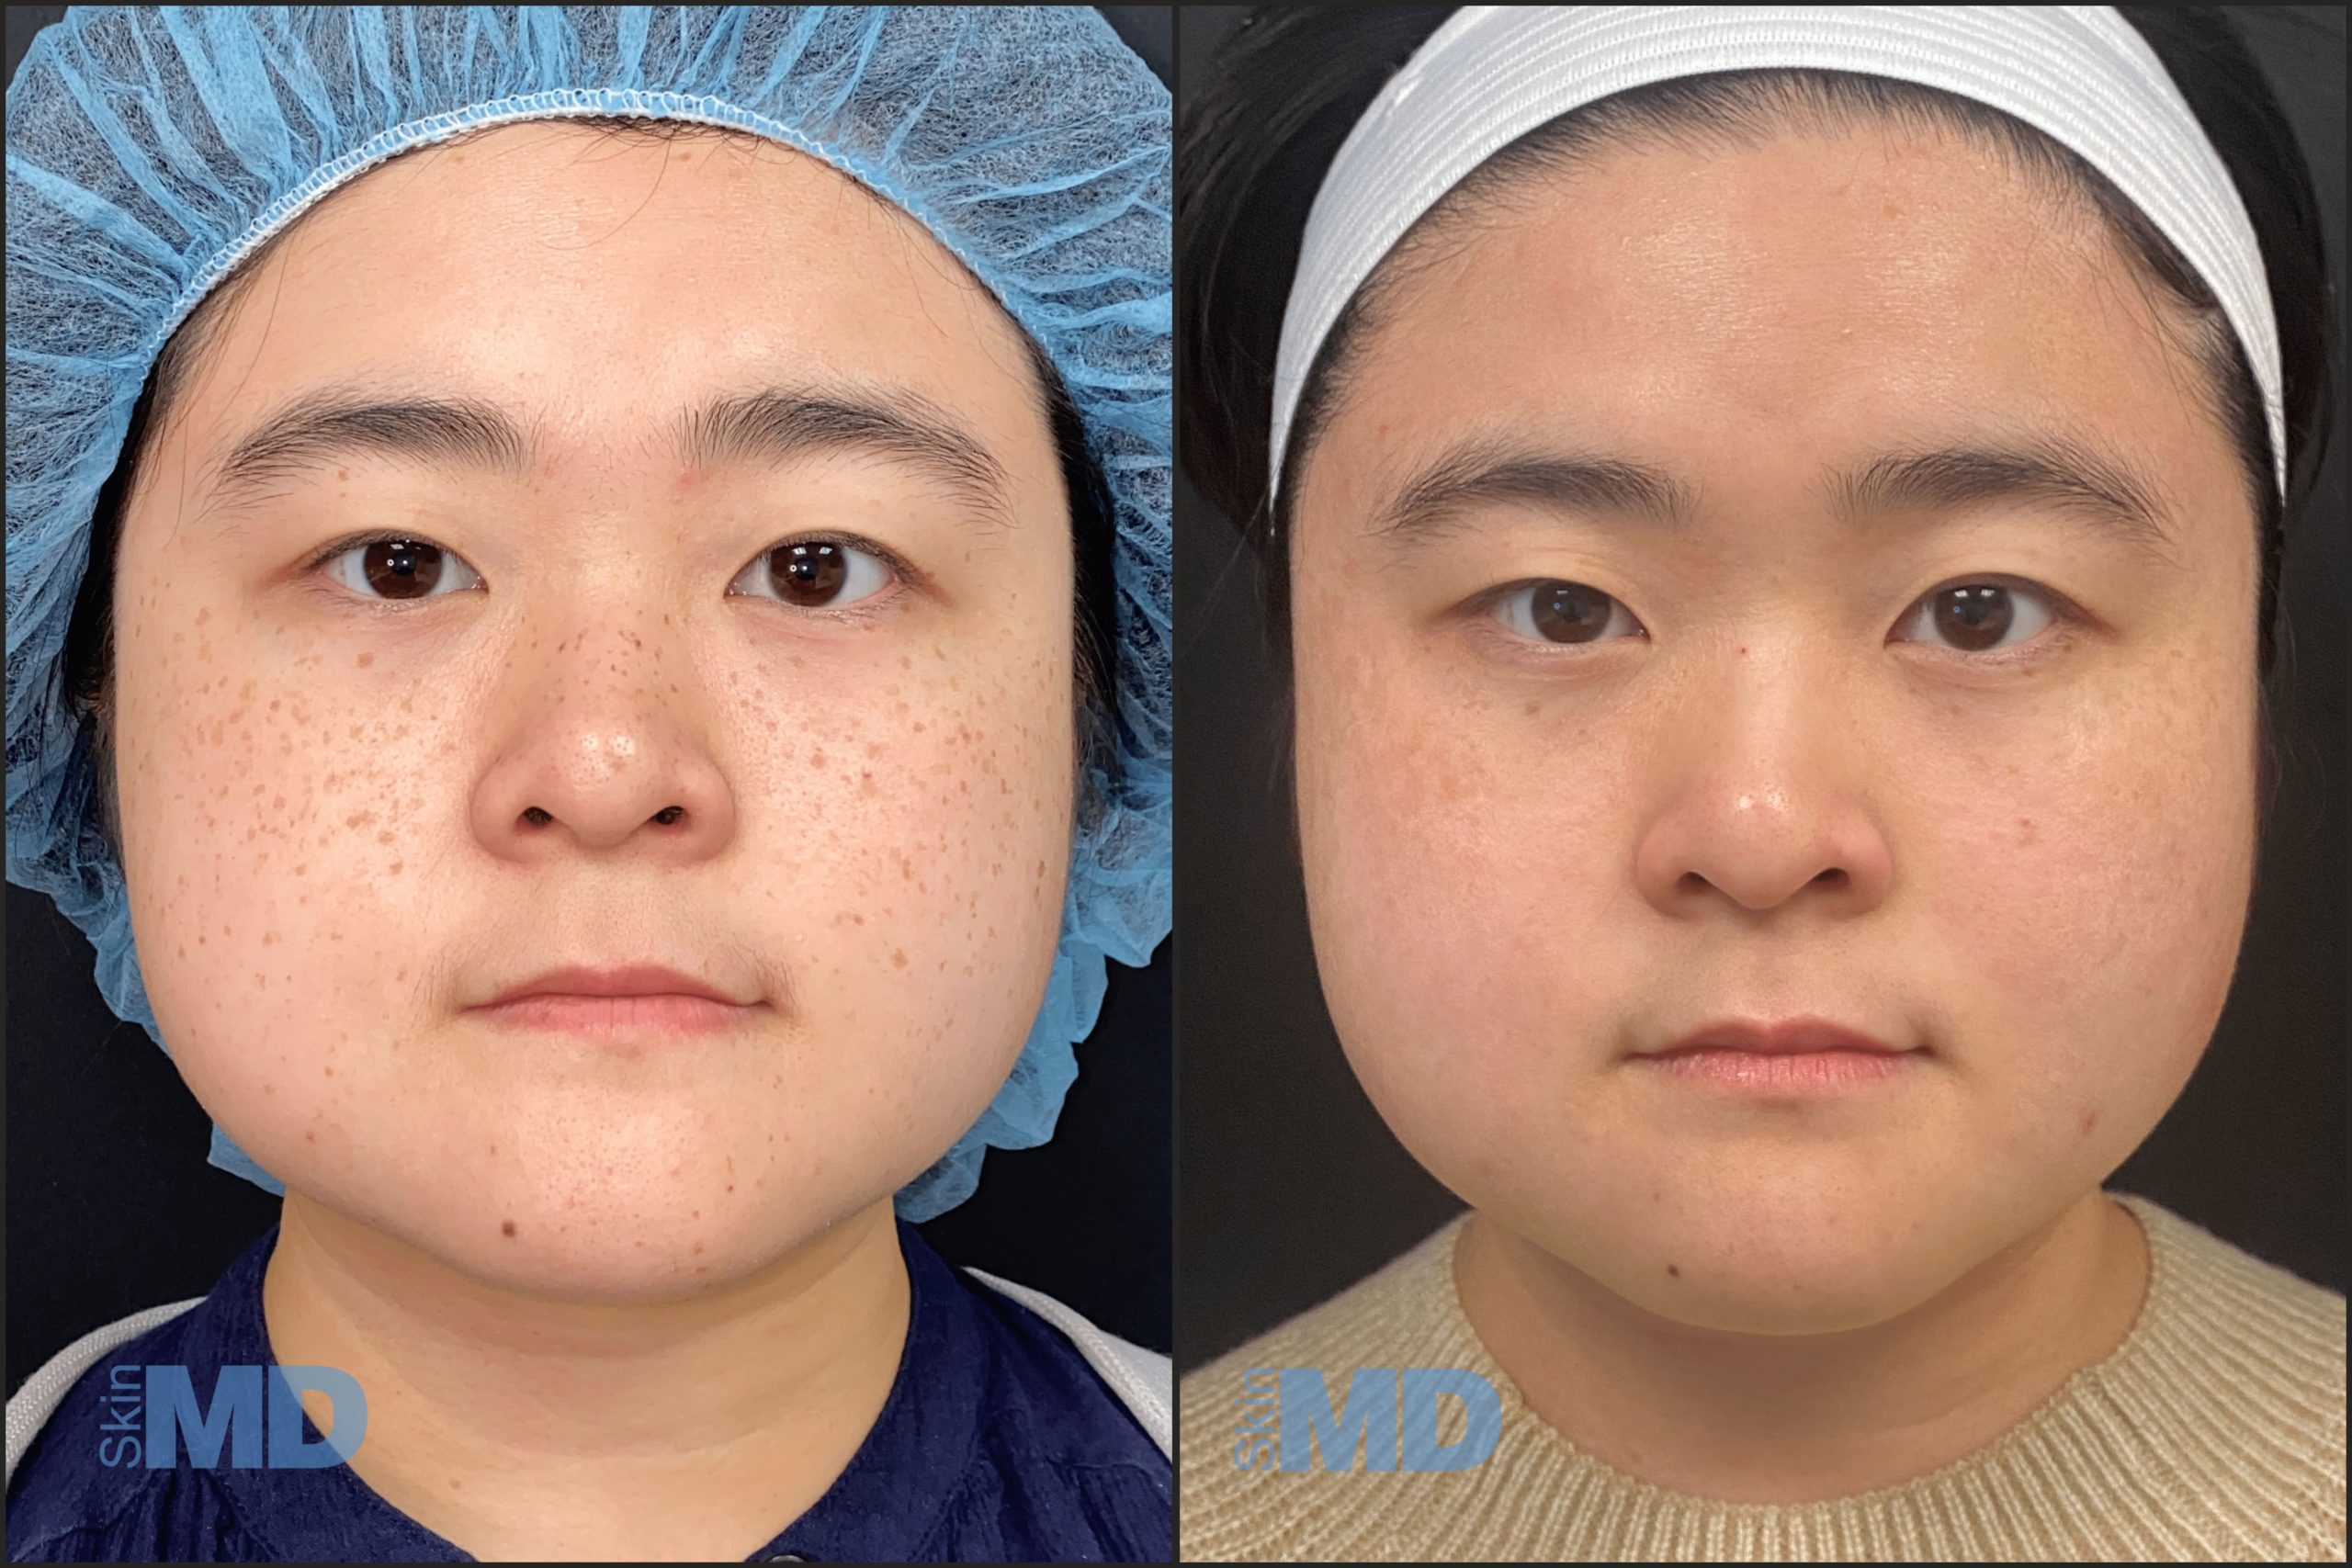 Before and after Pico Genesis results